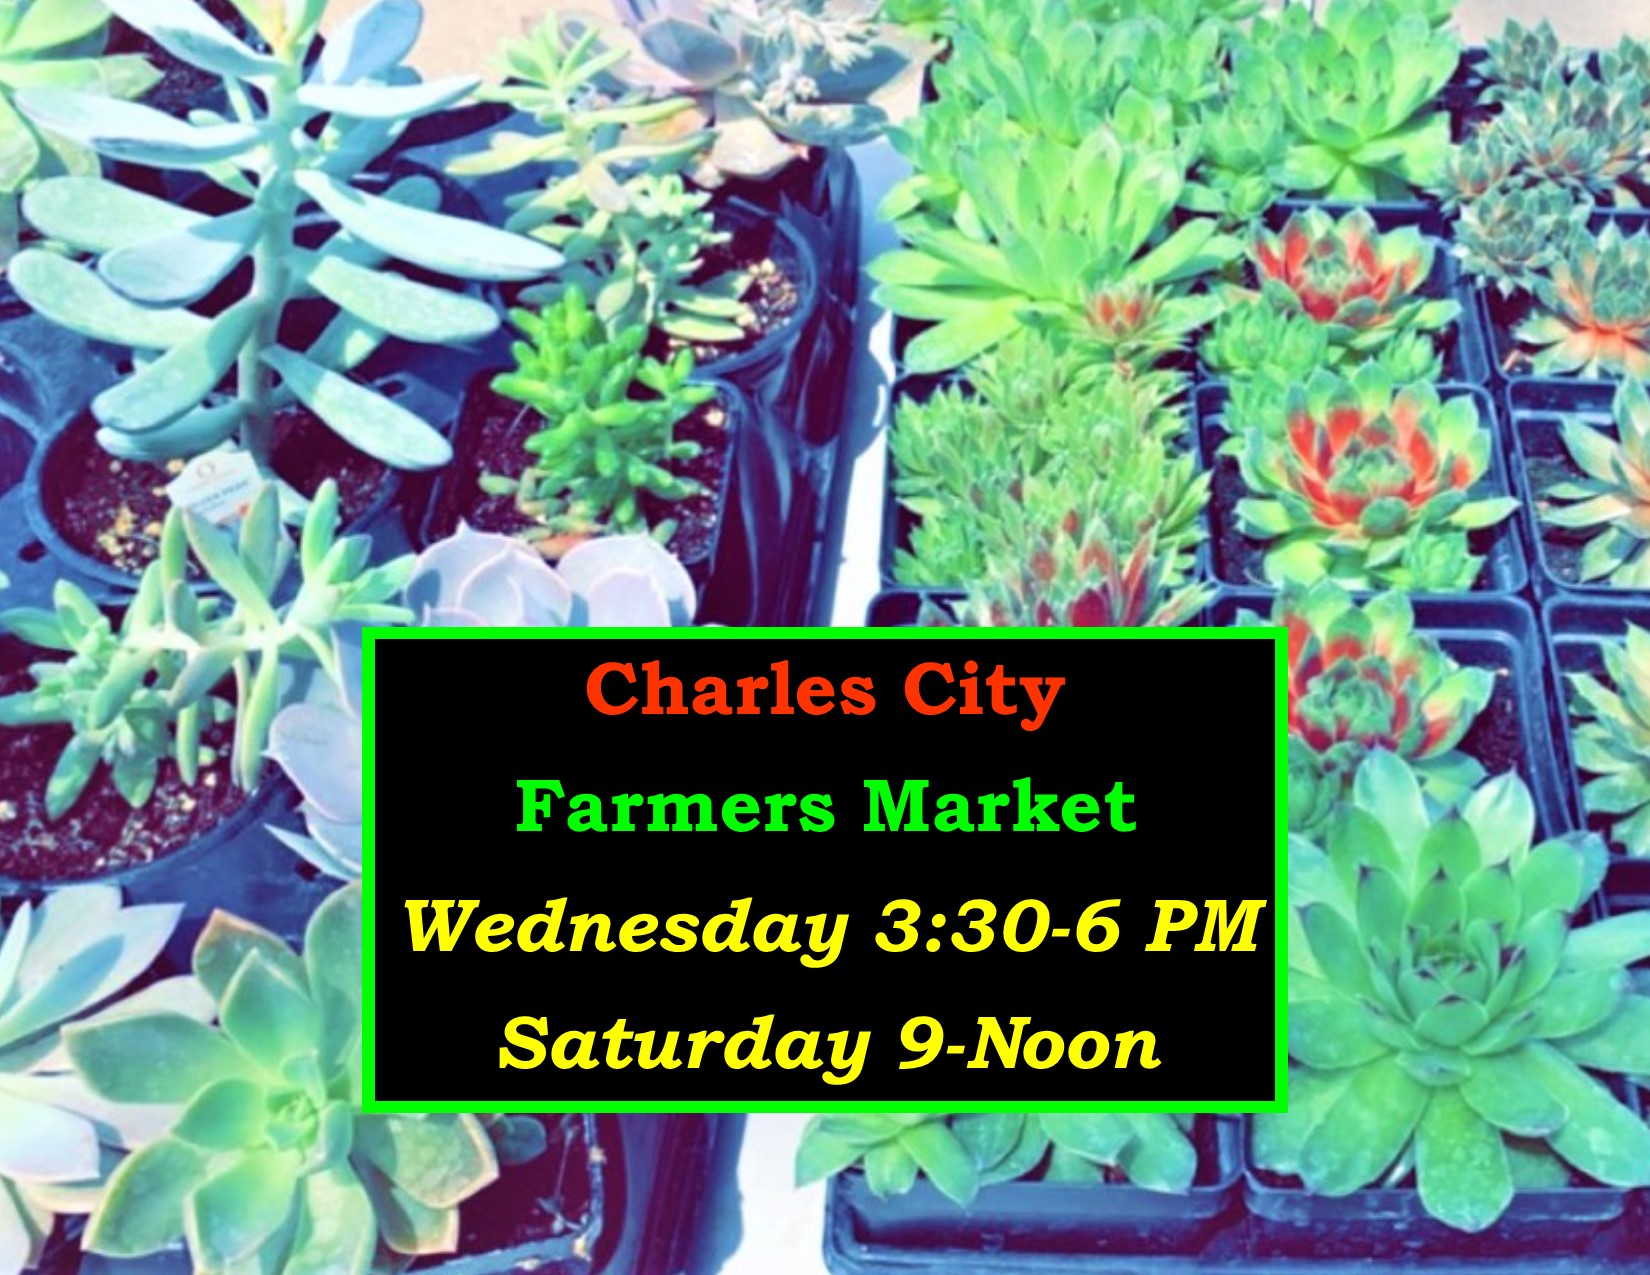 <h1 class="tribe-events-single-event-title">Charles City Farmers Market</h1>